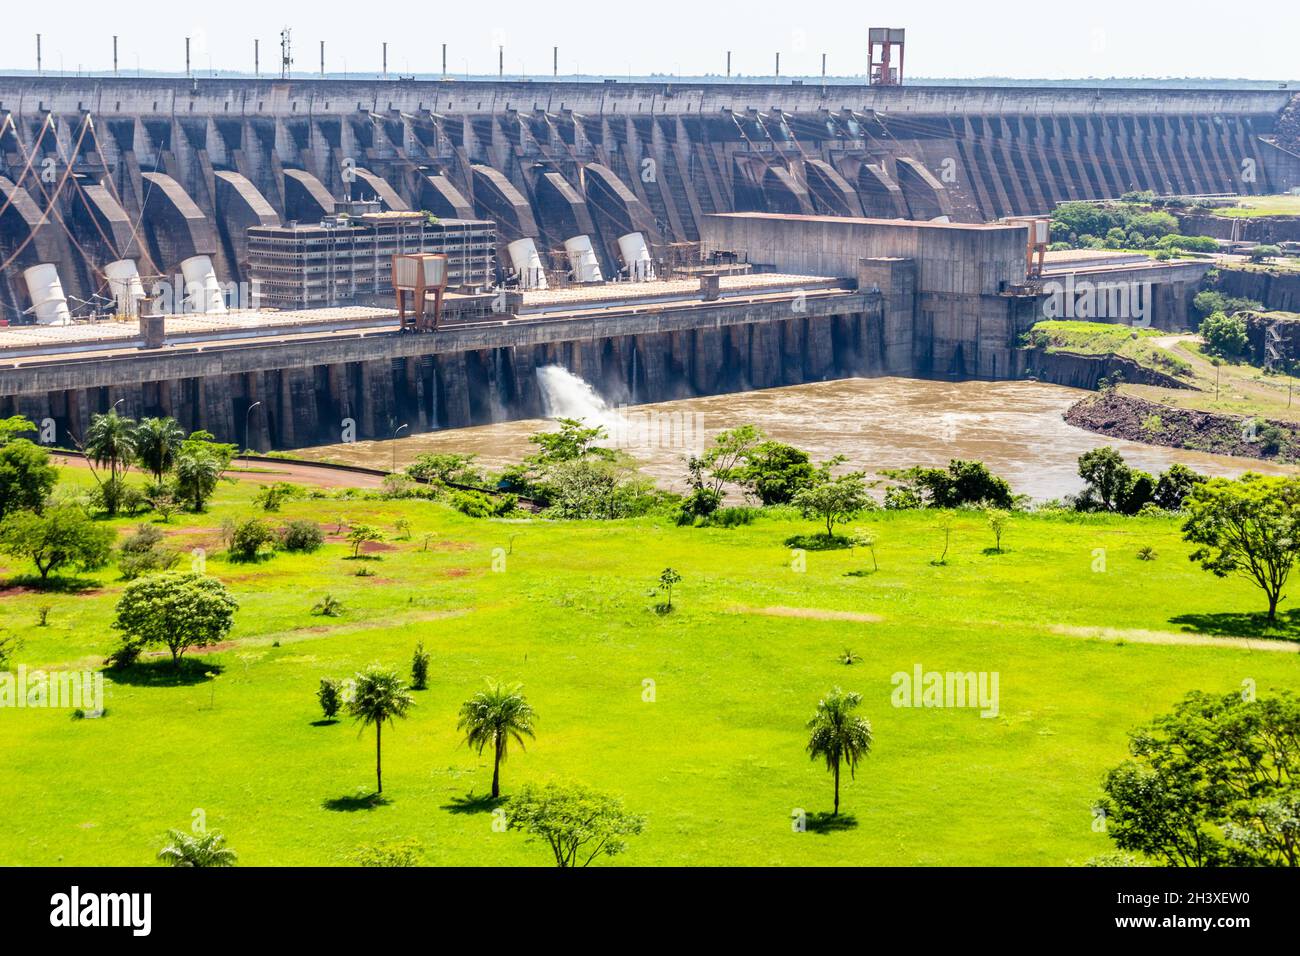 World's largest Itaipu hydroelectric dam on the Parana River located on the border between Brazil and Paraguay Stock Photo